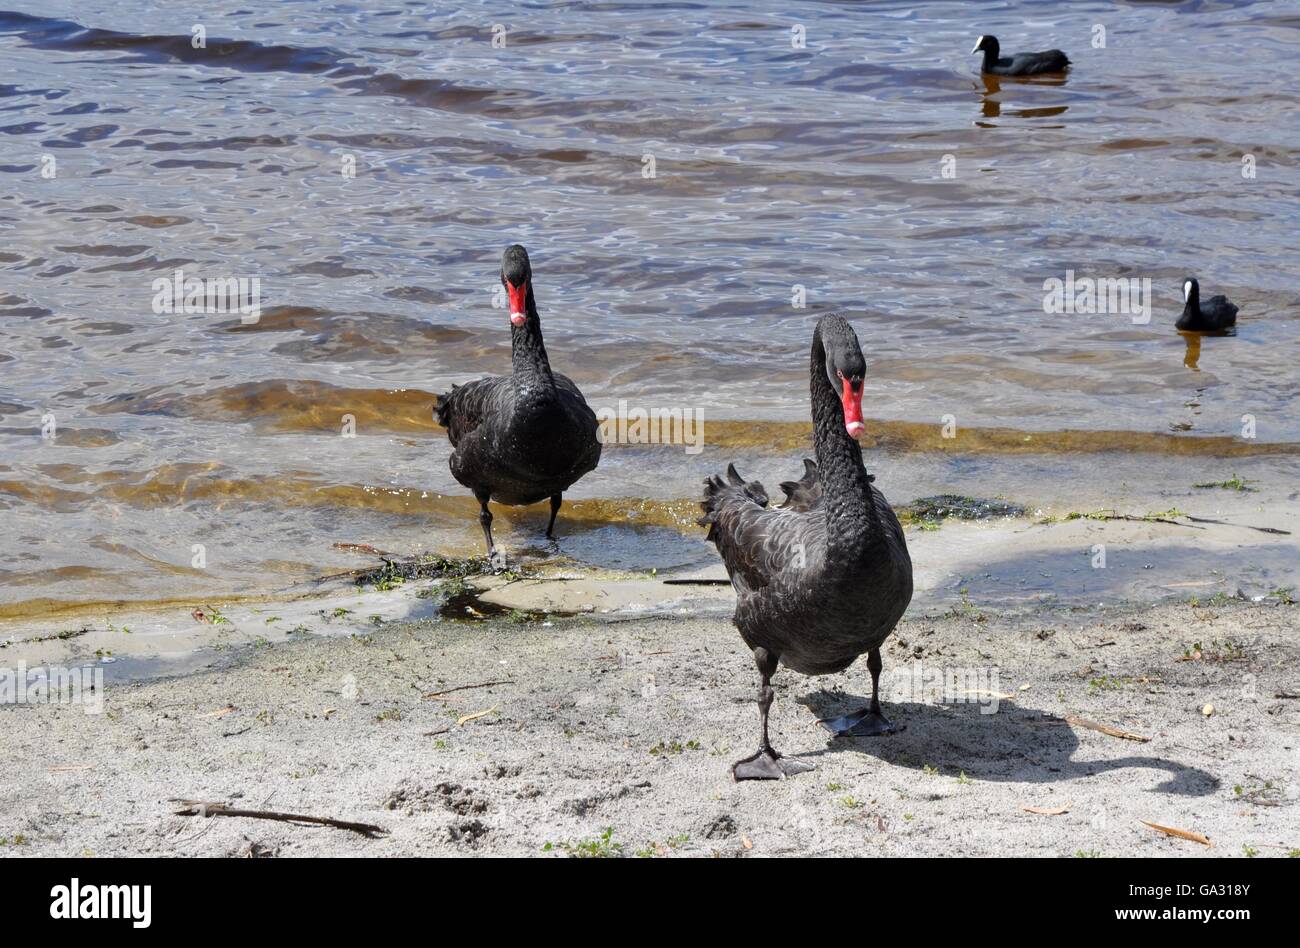 Australian black swans walking in a wetland lake setting with bright red bills and black plumage in Western Australia. Stock Photo